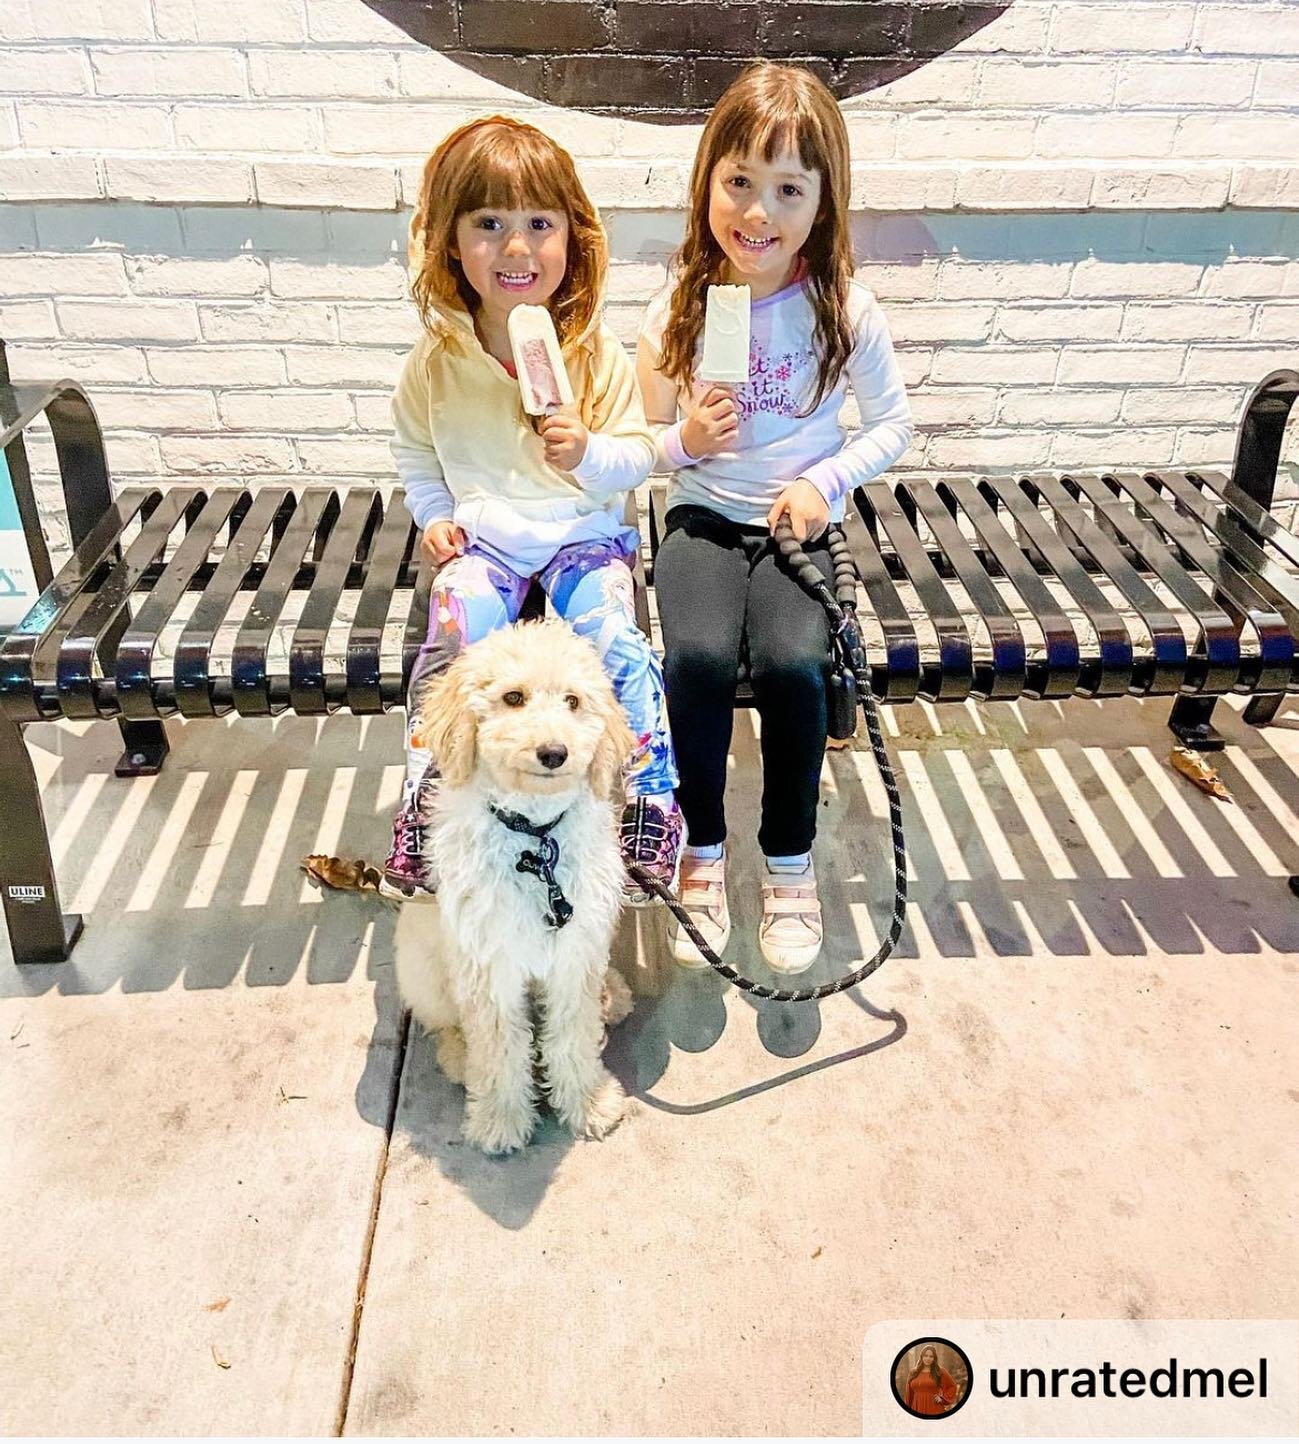 This is almost too much cuteness for one picture!! @unratedmel popped by the patio yesterday with these 3! 

If those smiles don&rsquo;t brighten your day, we aren&rsquo;t sure what will 😊

#velopops #velopopsclt #hellovelo #puppop # sunnysmiles #po